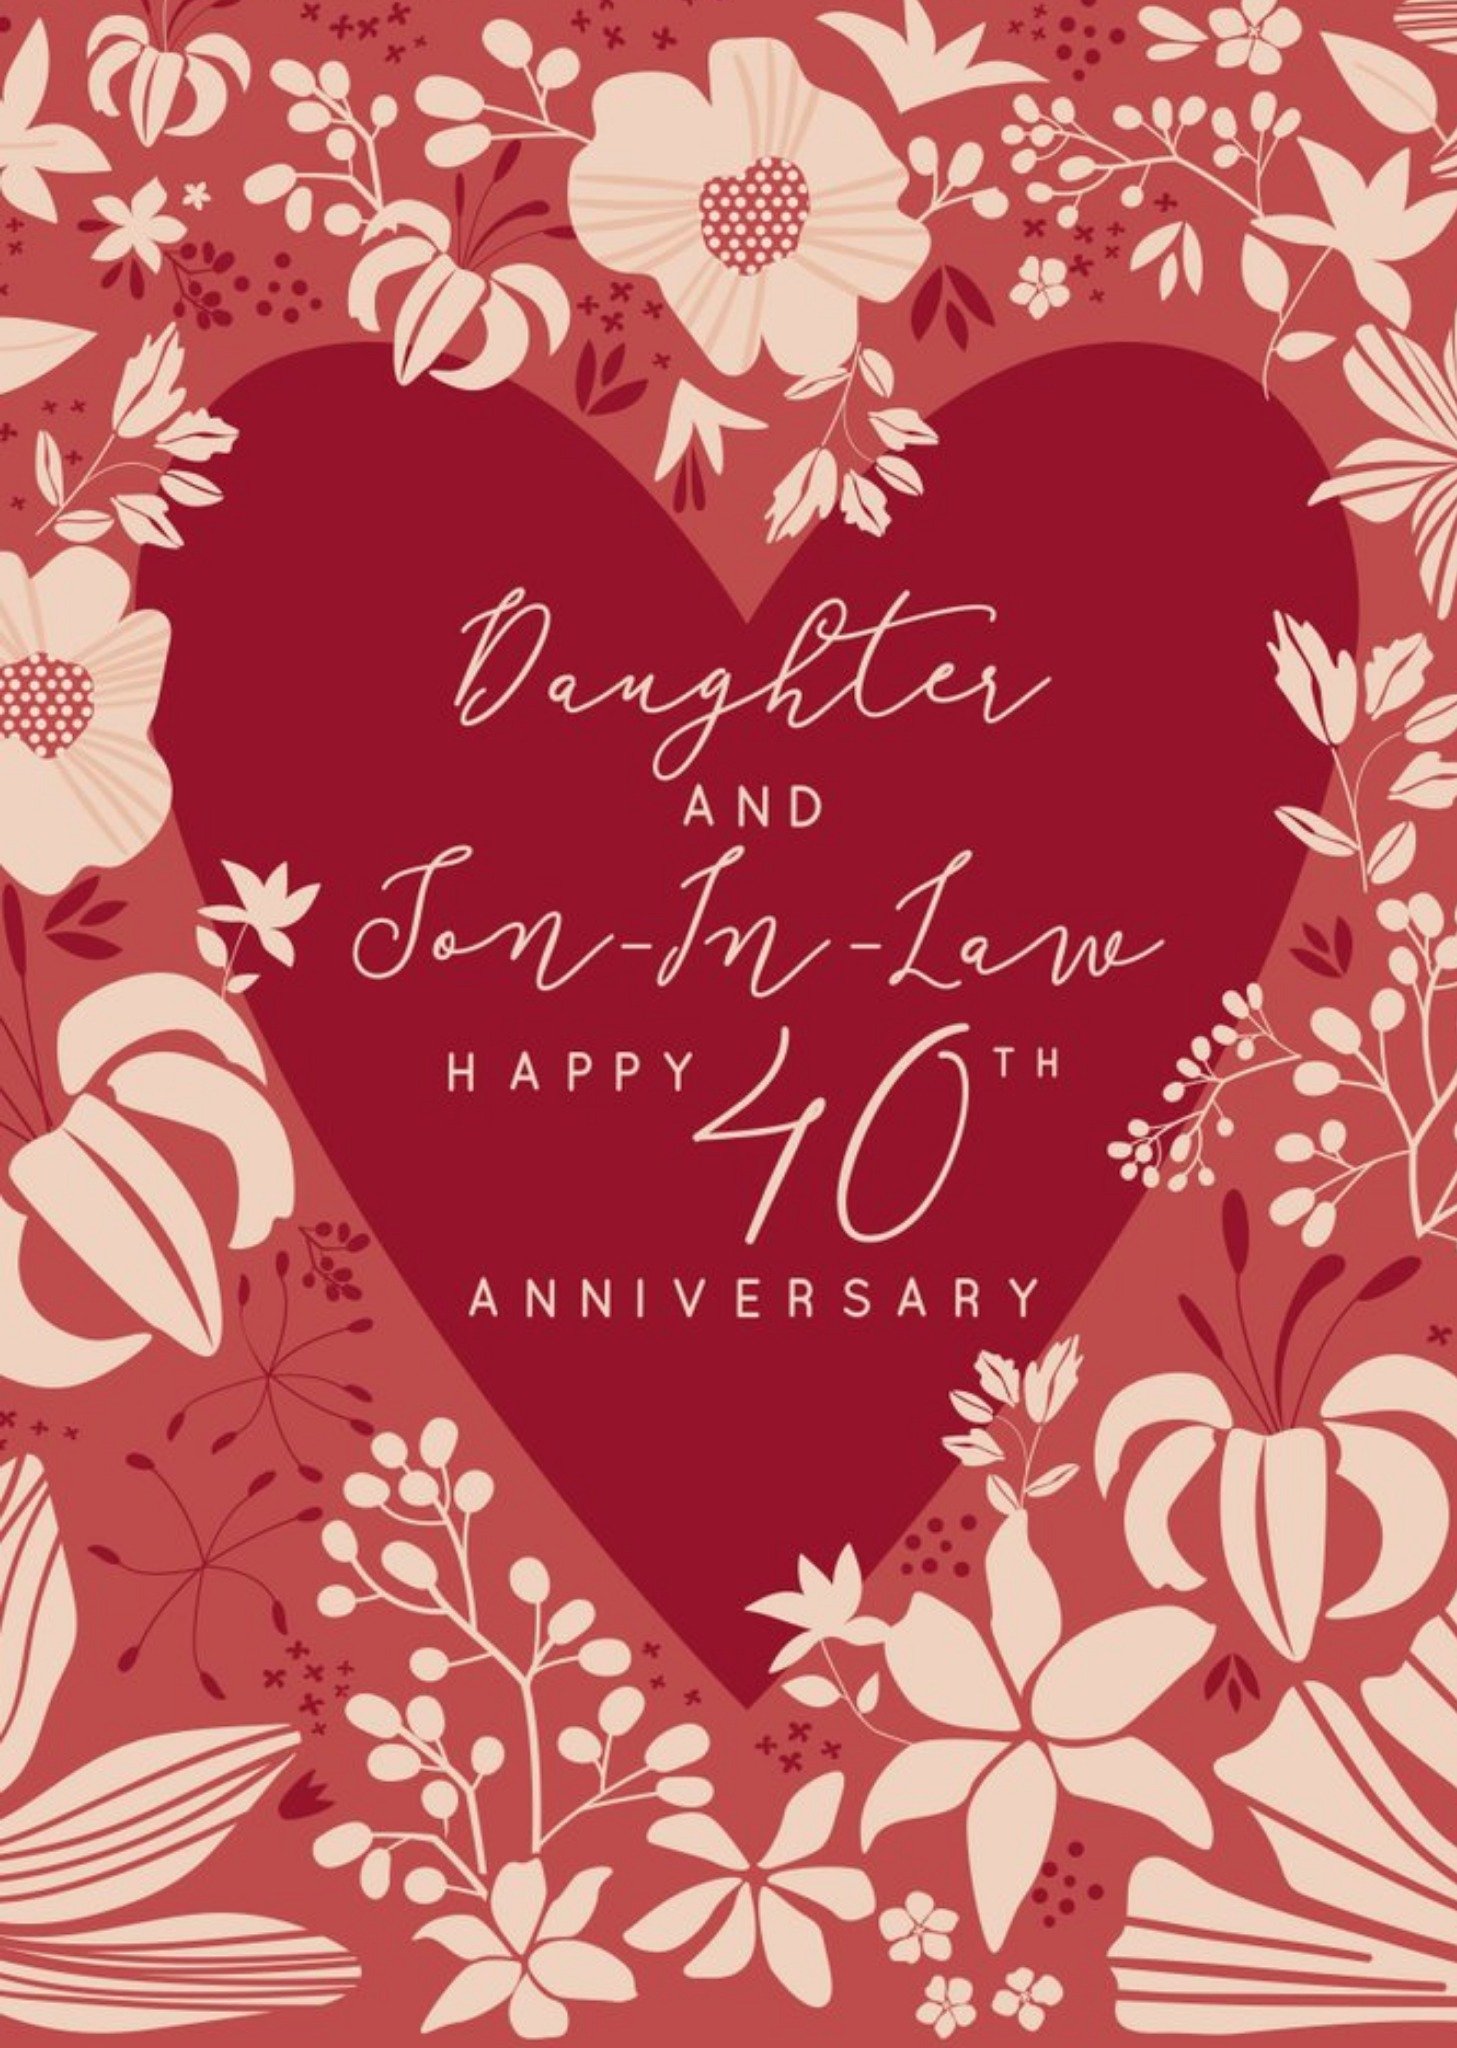 Moonpig Laura Darrington Floral Design Daughter And Son In Law Happy 40th Anniversary Card Ecard